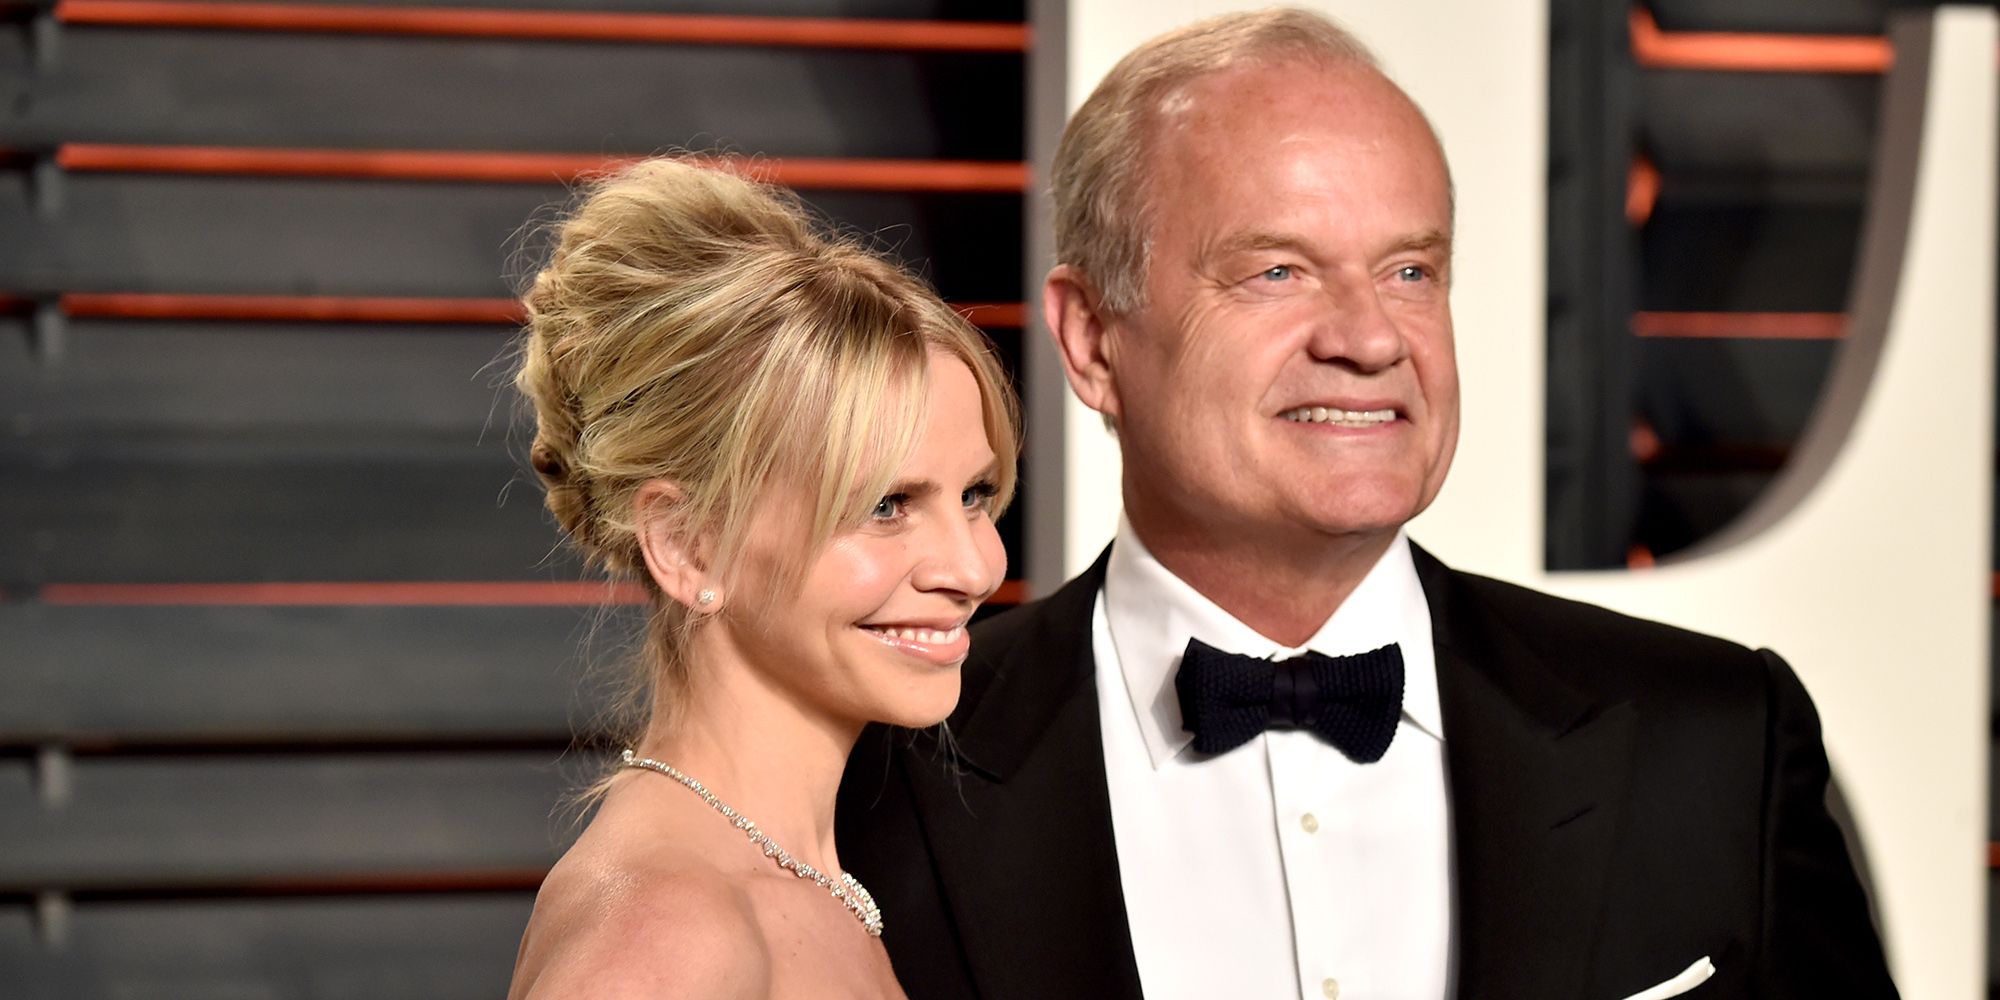 Kelsey Grammer Got Tattooed Near His Balls So He Wouldnt Cheat on His Wife Kayte Walsh